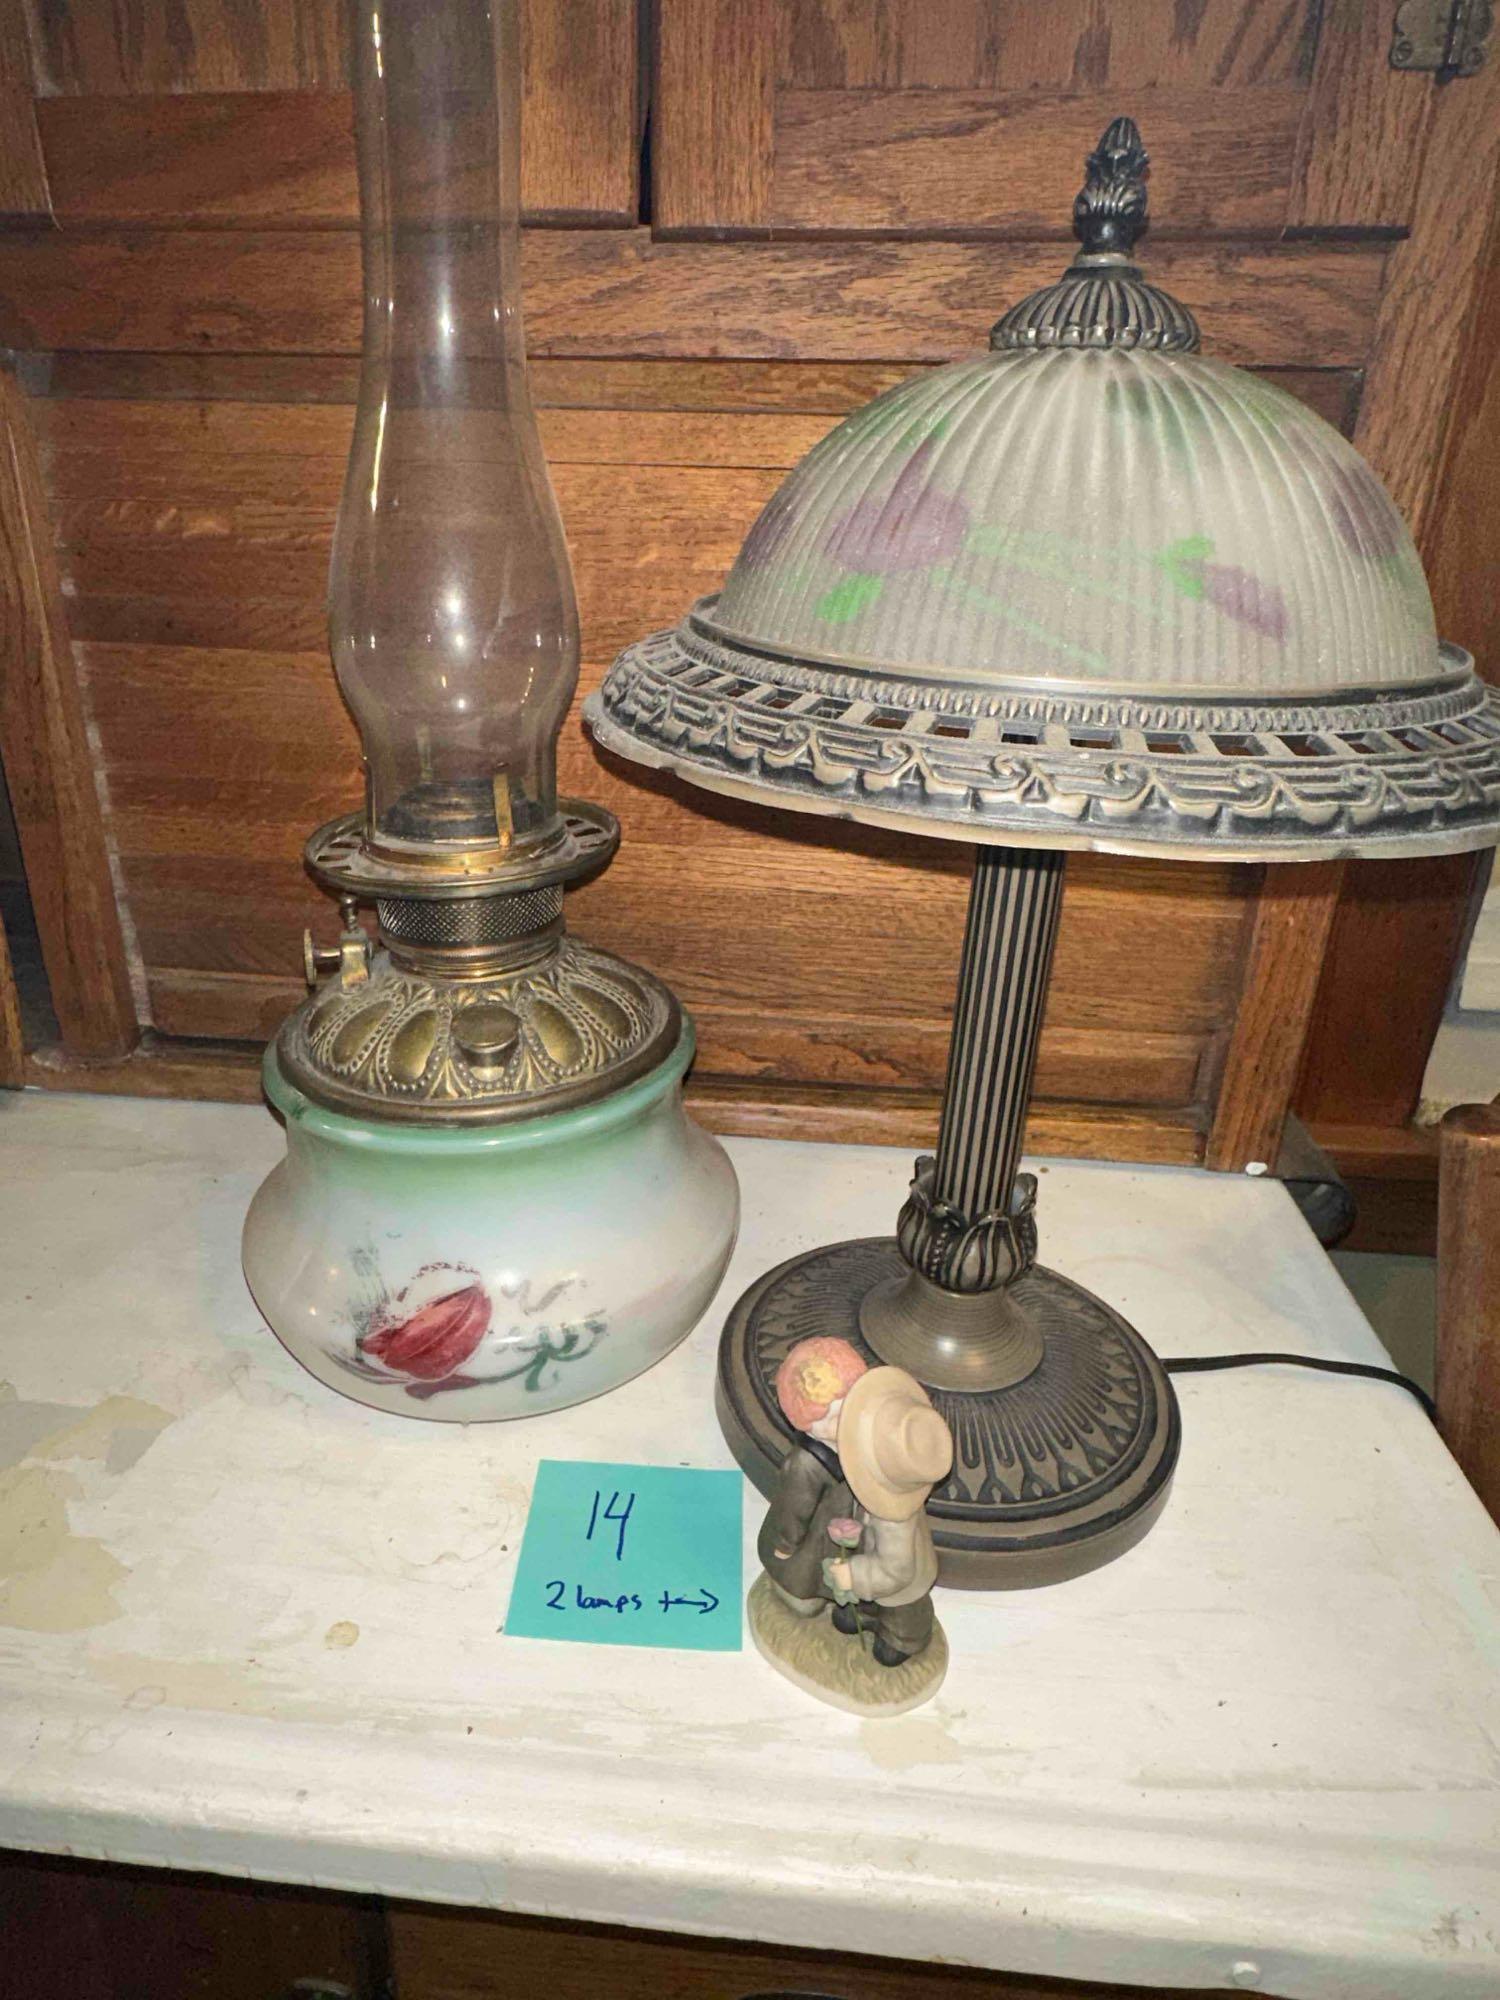 2 Lamps and figurine